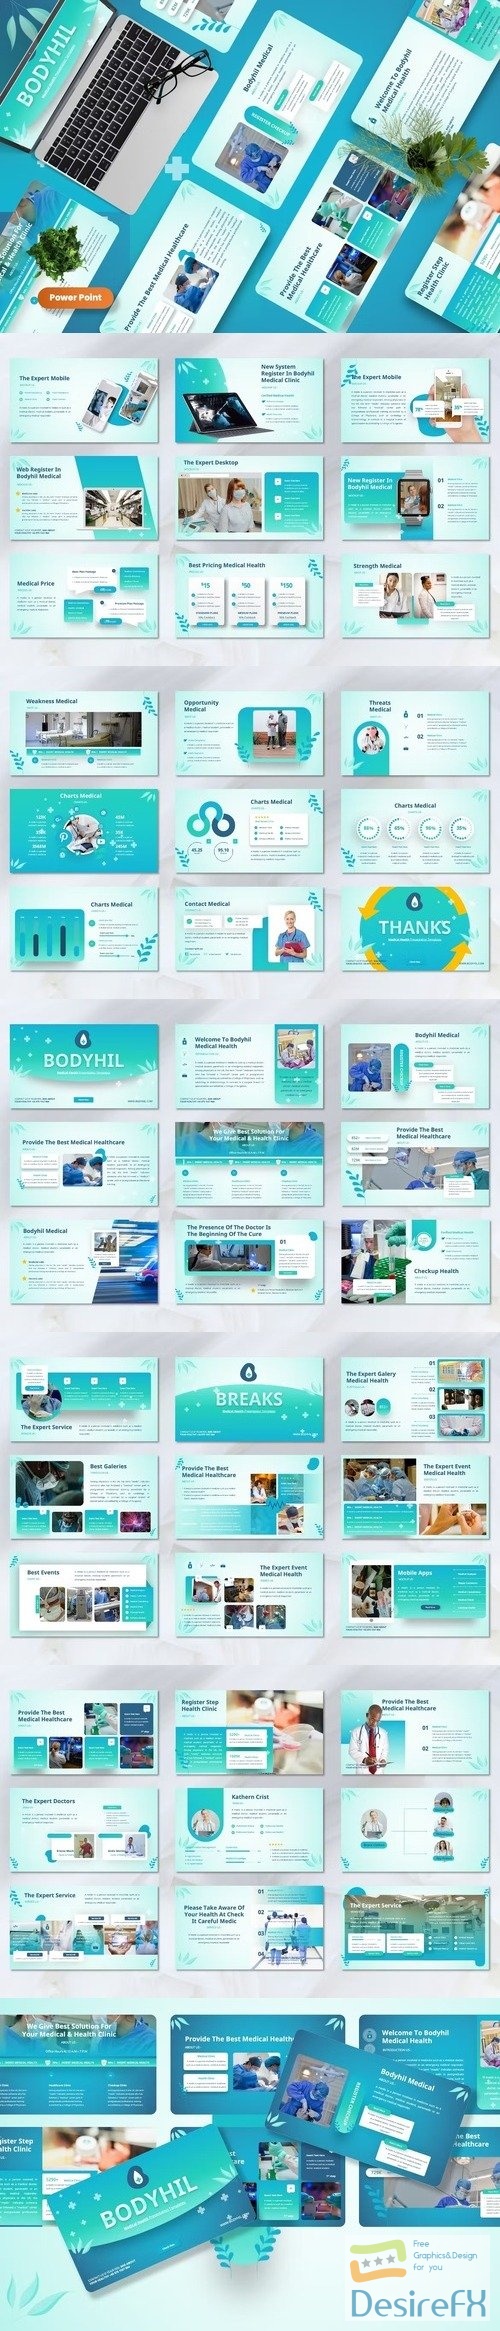 Bodyhil - Medical Powerpoint Template